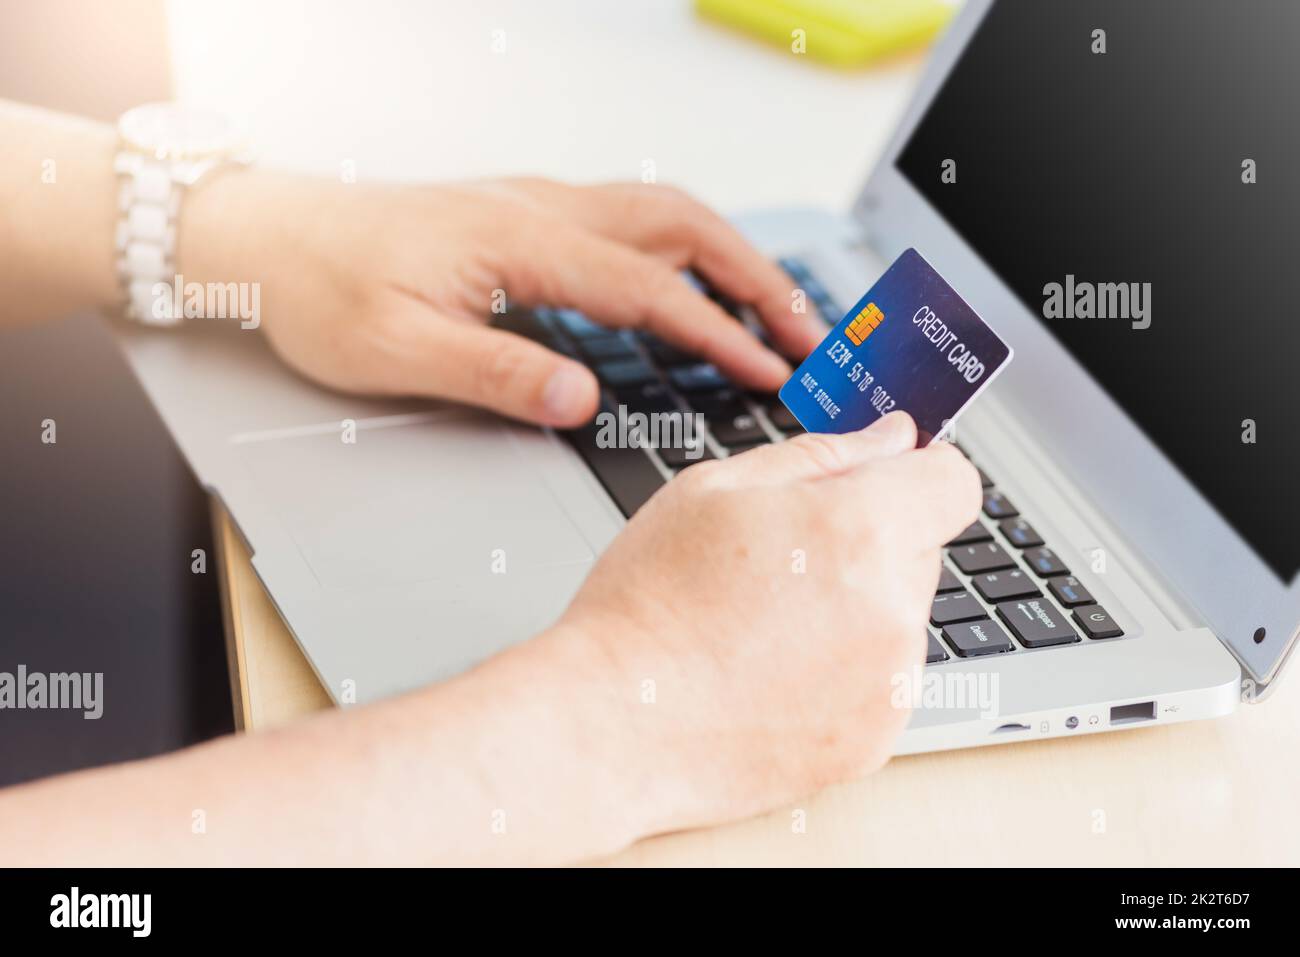 senior adult man holding credit card and using technology on laptop computer Stock Photo